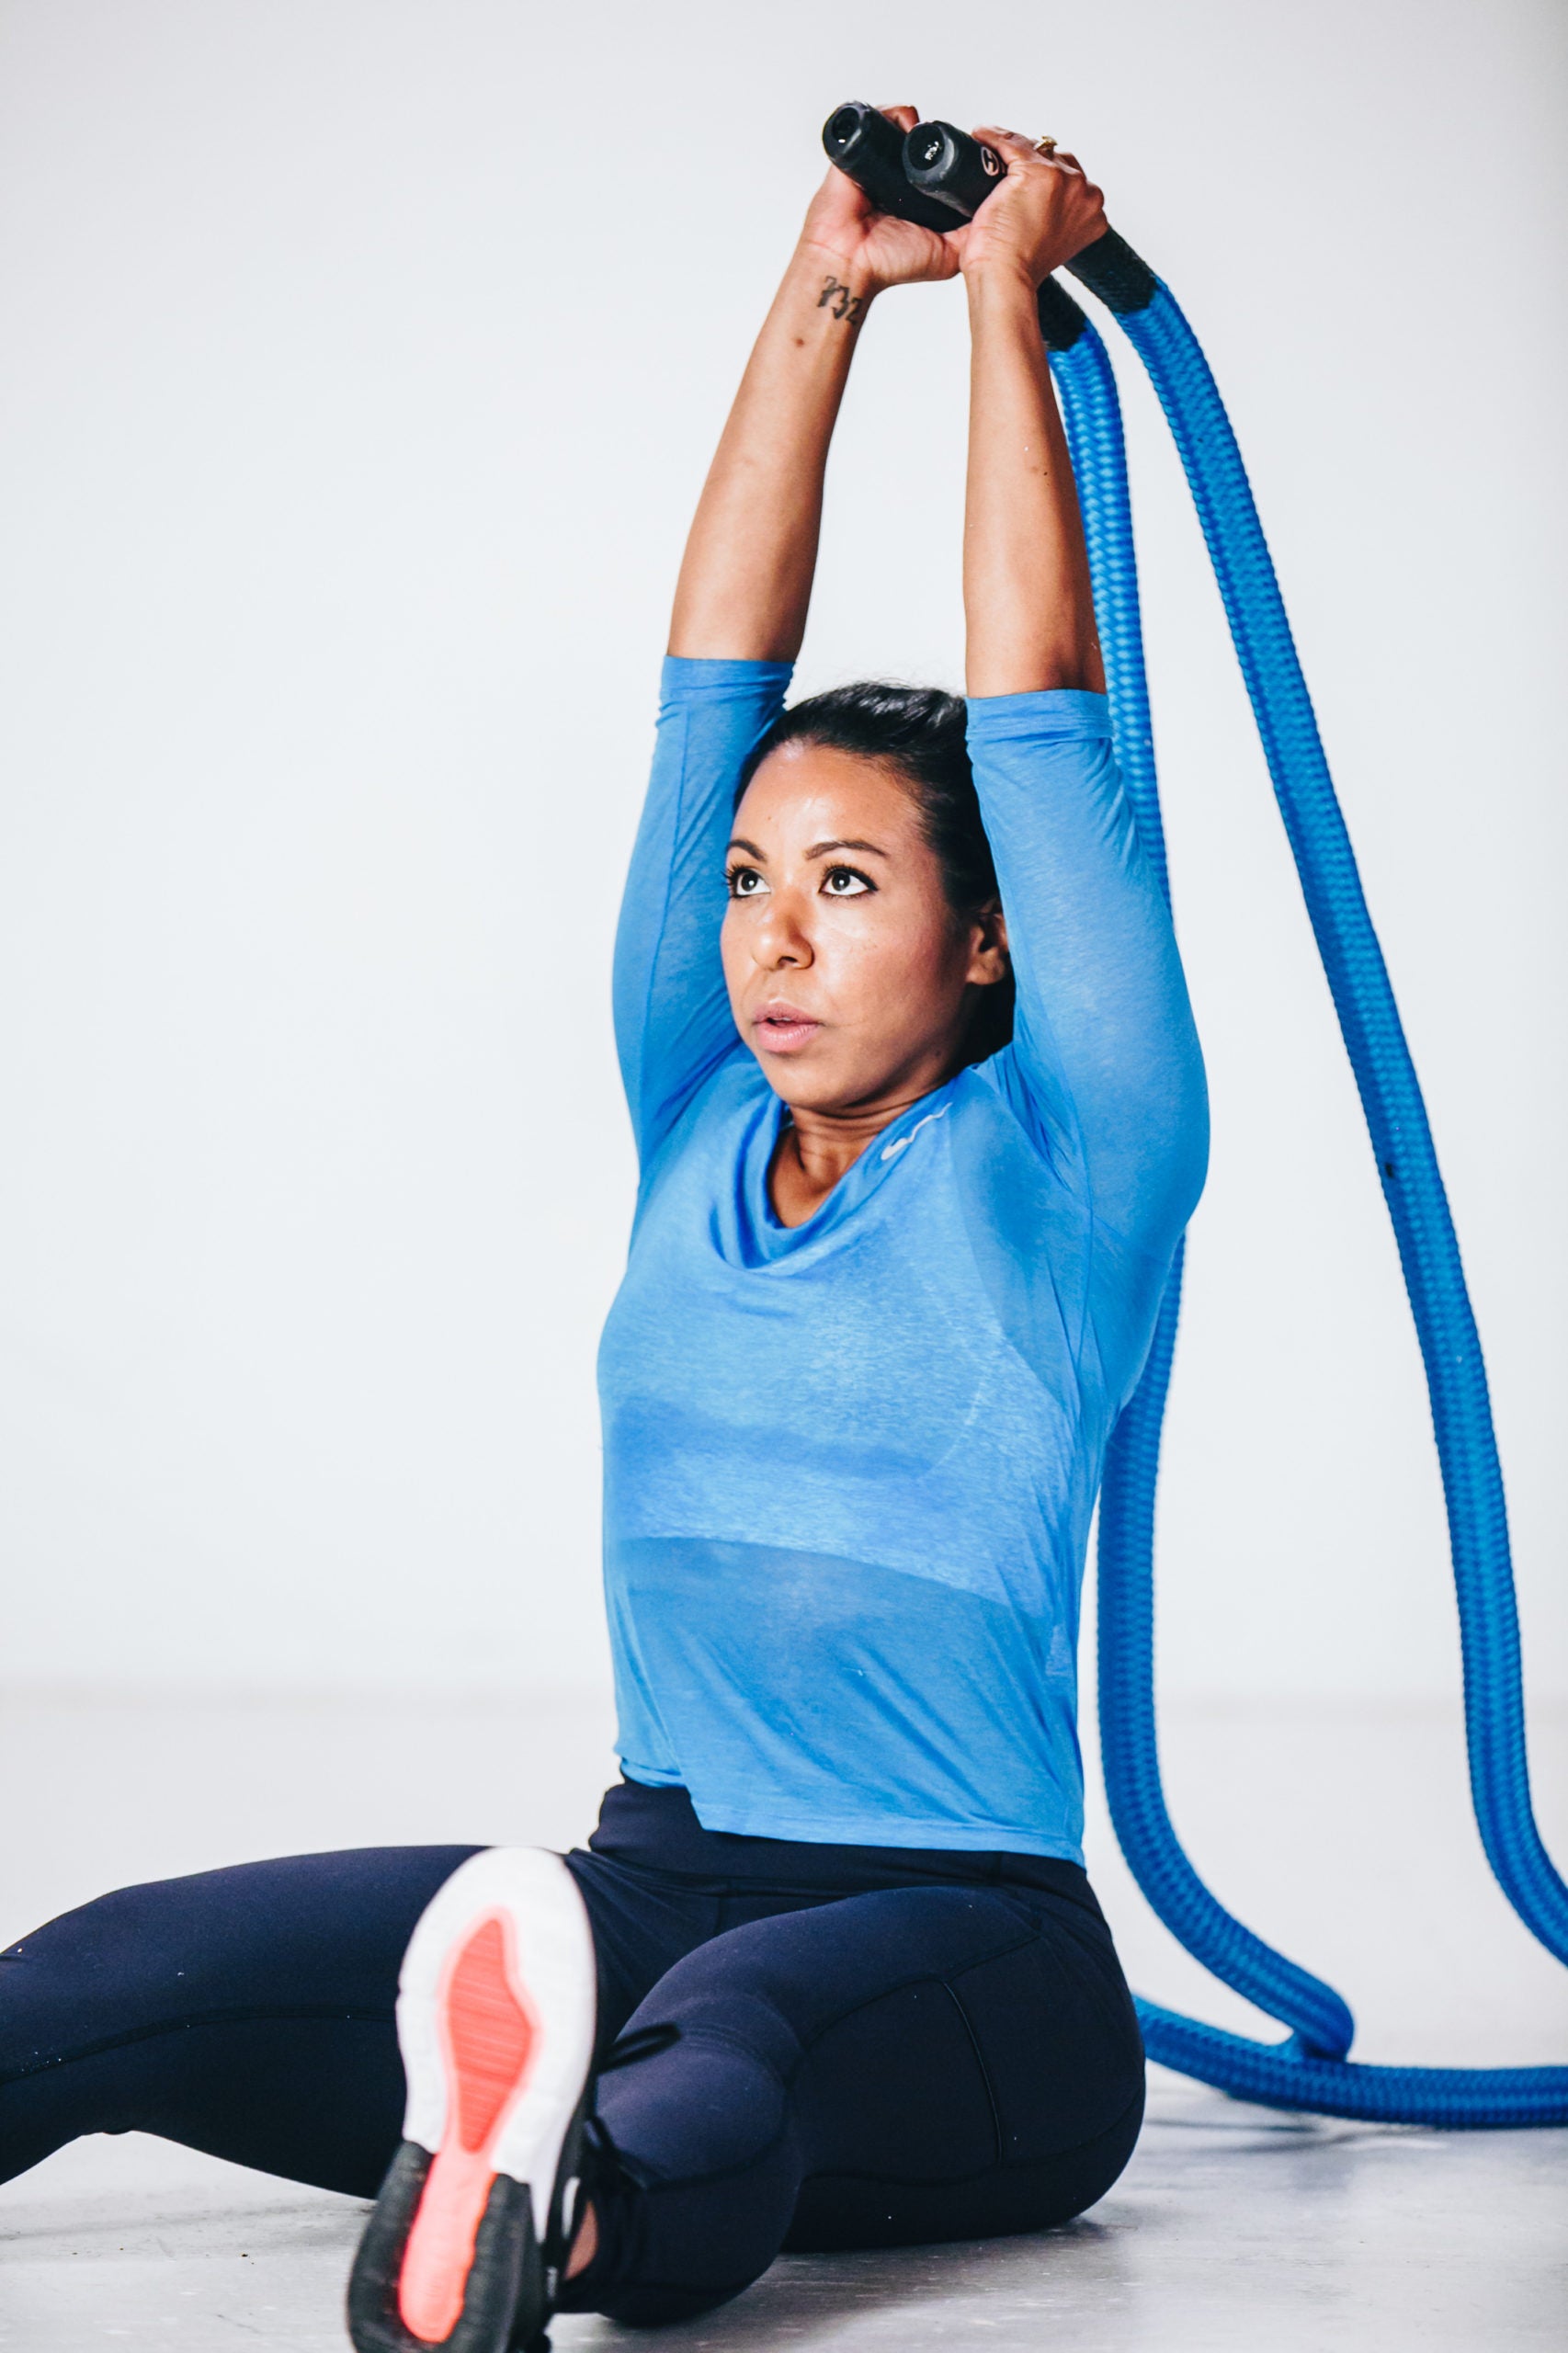 Image of female fitness model seated on floor legs extended and arms extended overhead holding hyper rope alternative battle rope doing overhead tricep extensions battle rope exercise